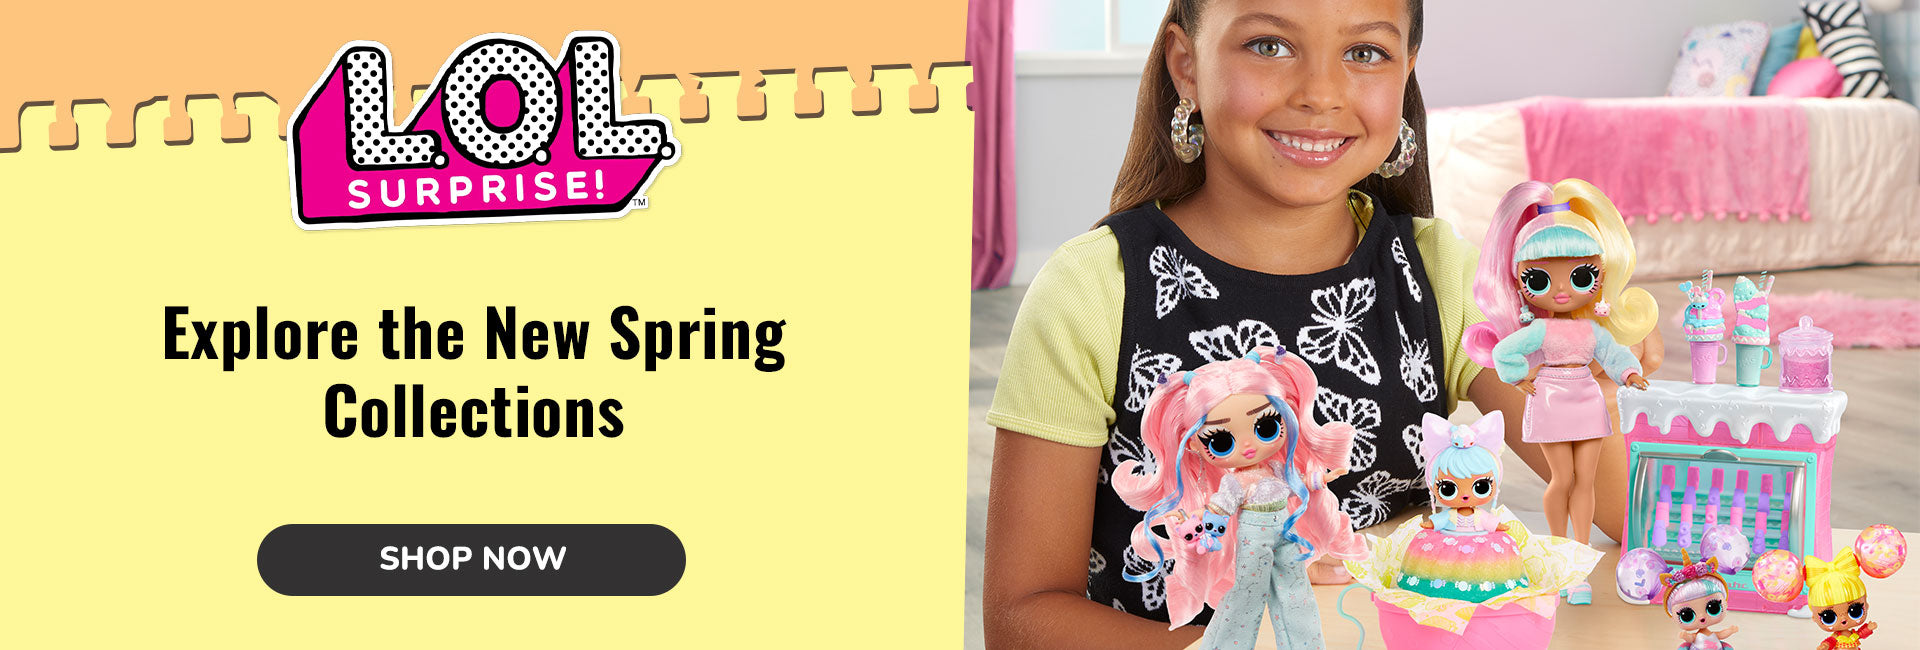 Explore the New Spring Collections - LOL Surprise